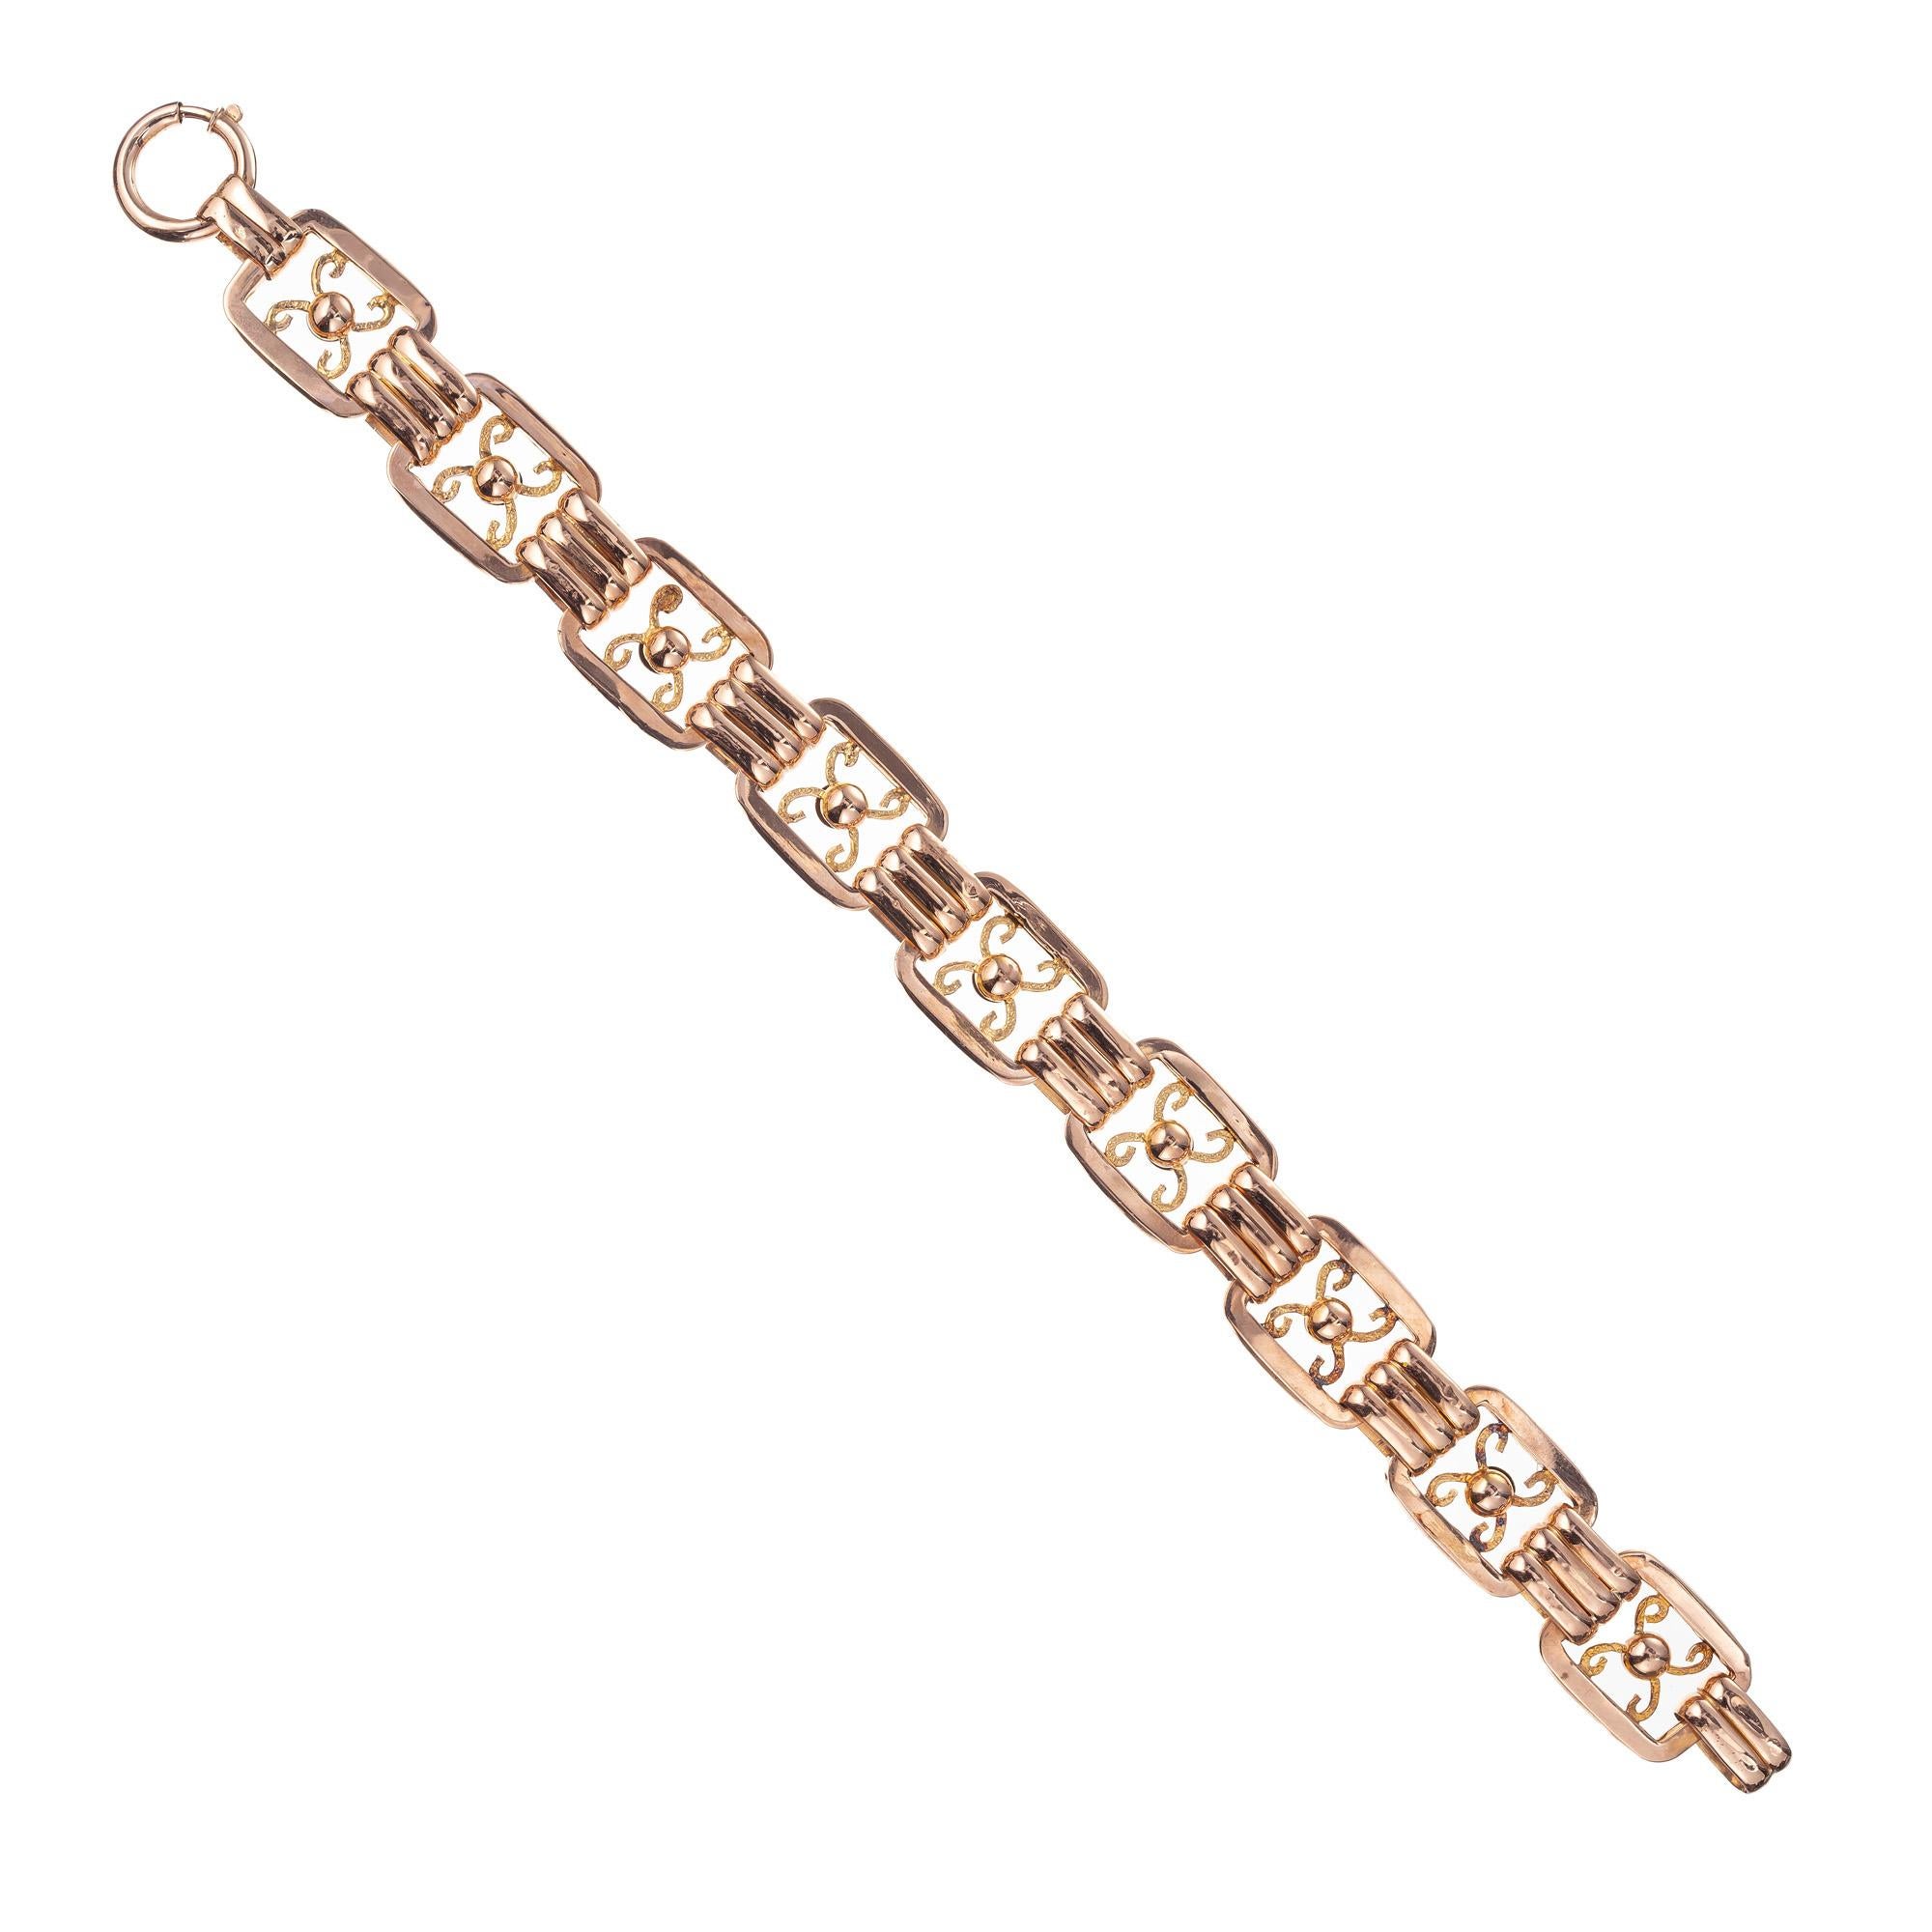 1950's Mid-Century handcrafted to perfection this rose gold rectangular link bracelet is meticulously crafted and is a truly elegant piece of fine jewelry. Tested 18k with a very deep rose color, this bracelet is a statement piece that effortlessly